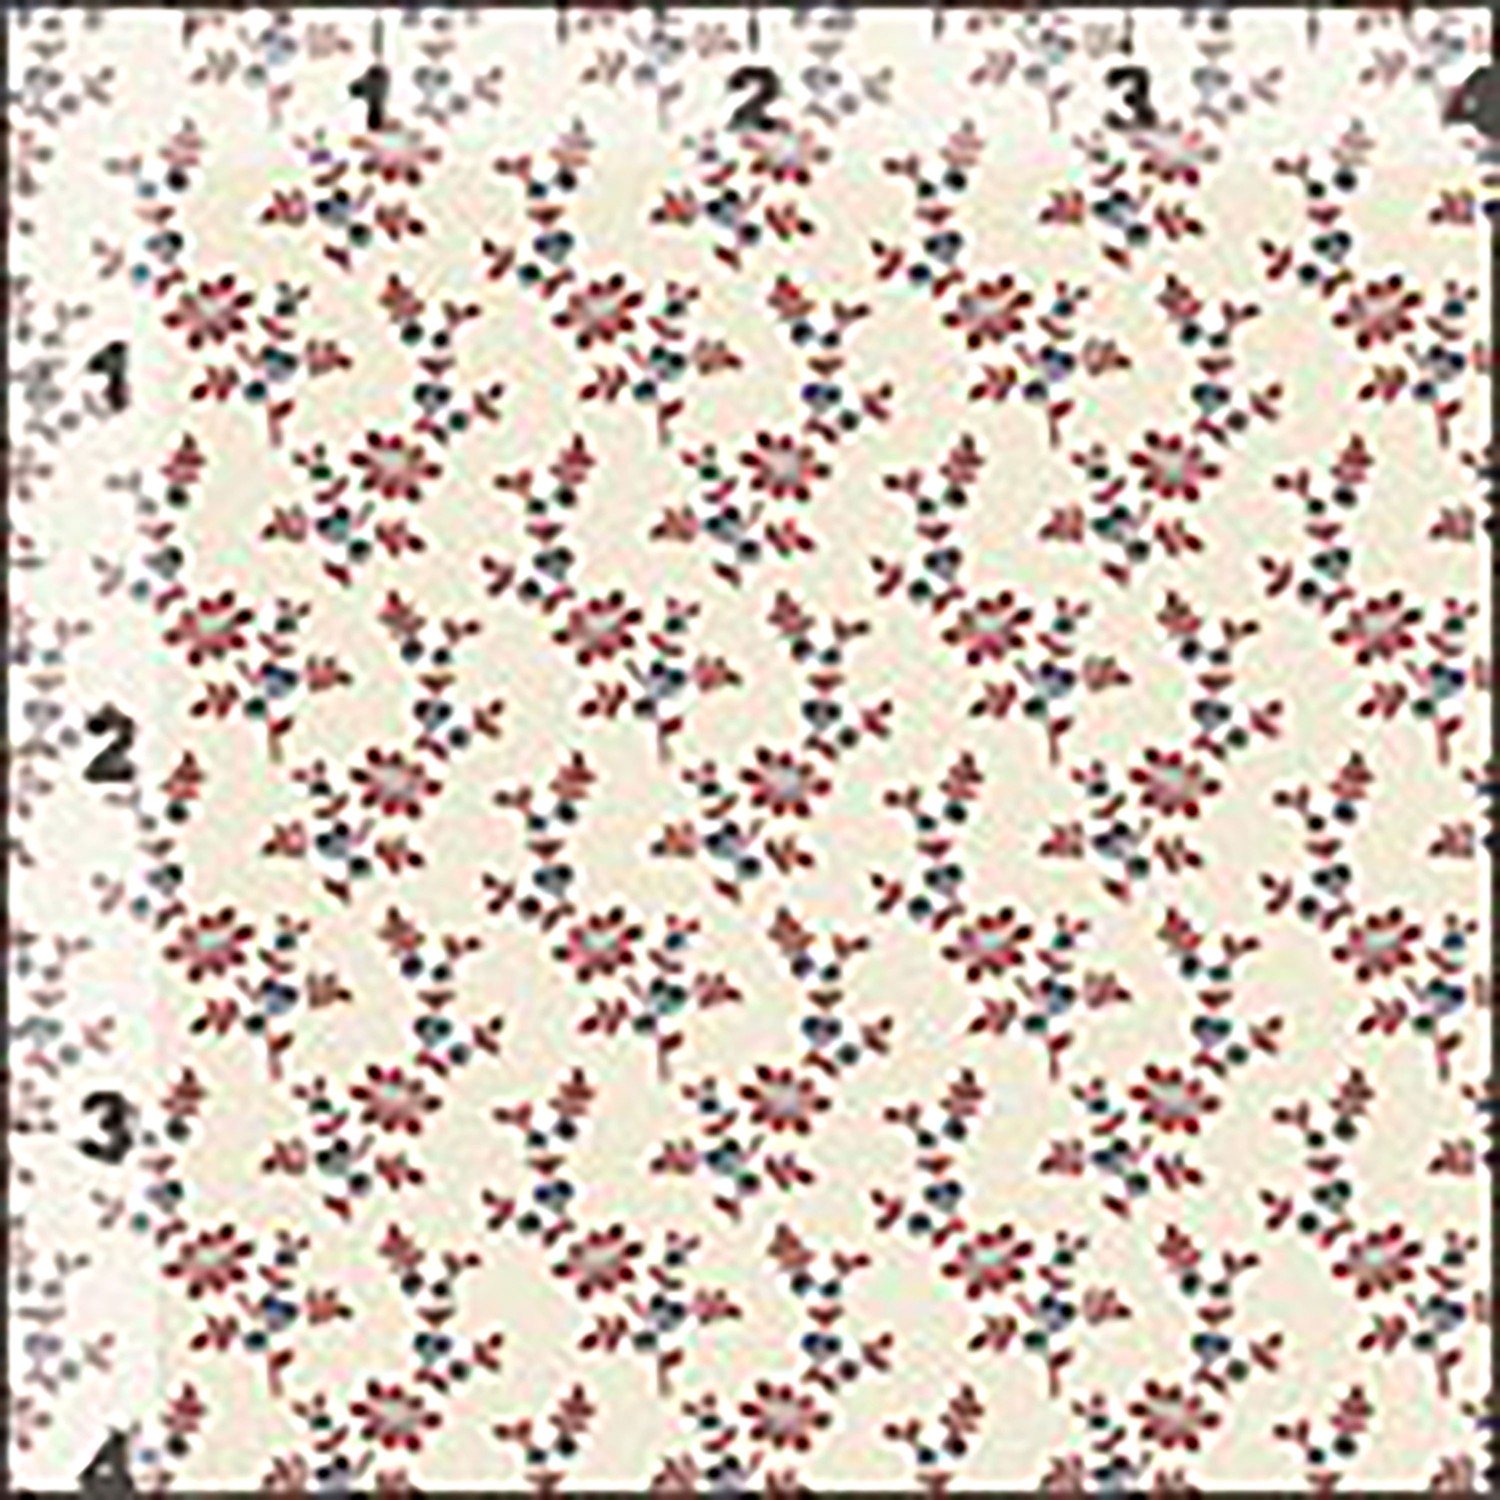 Specialty Cuts Floral Check 1 Yard Cut Lt Carnation Cream Multi Color  Quilting Cotton Fabric